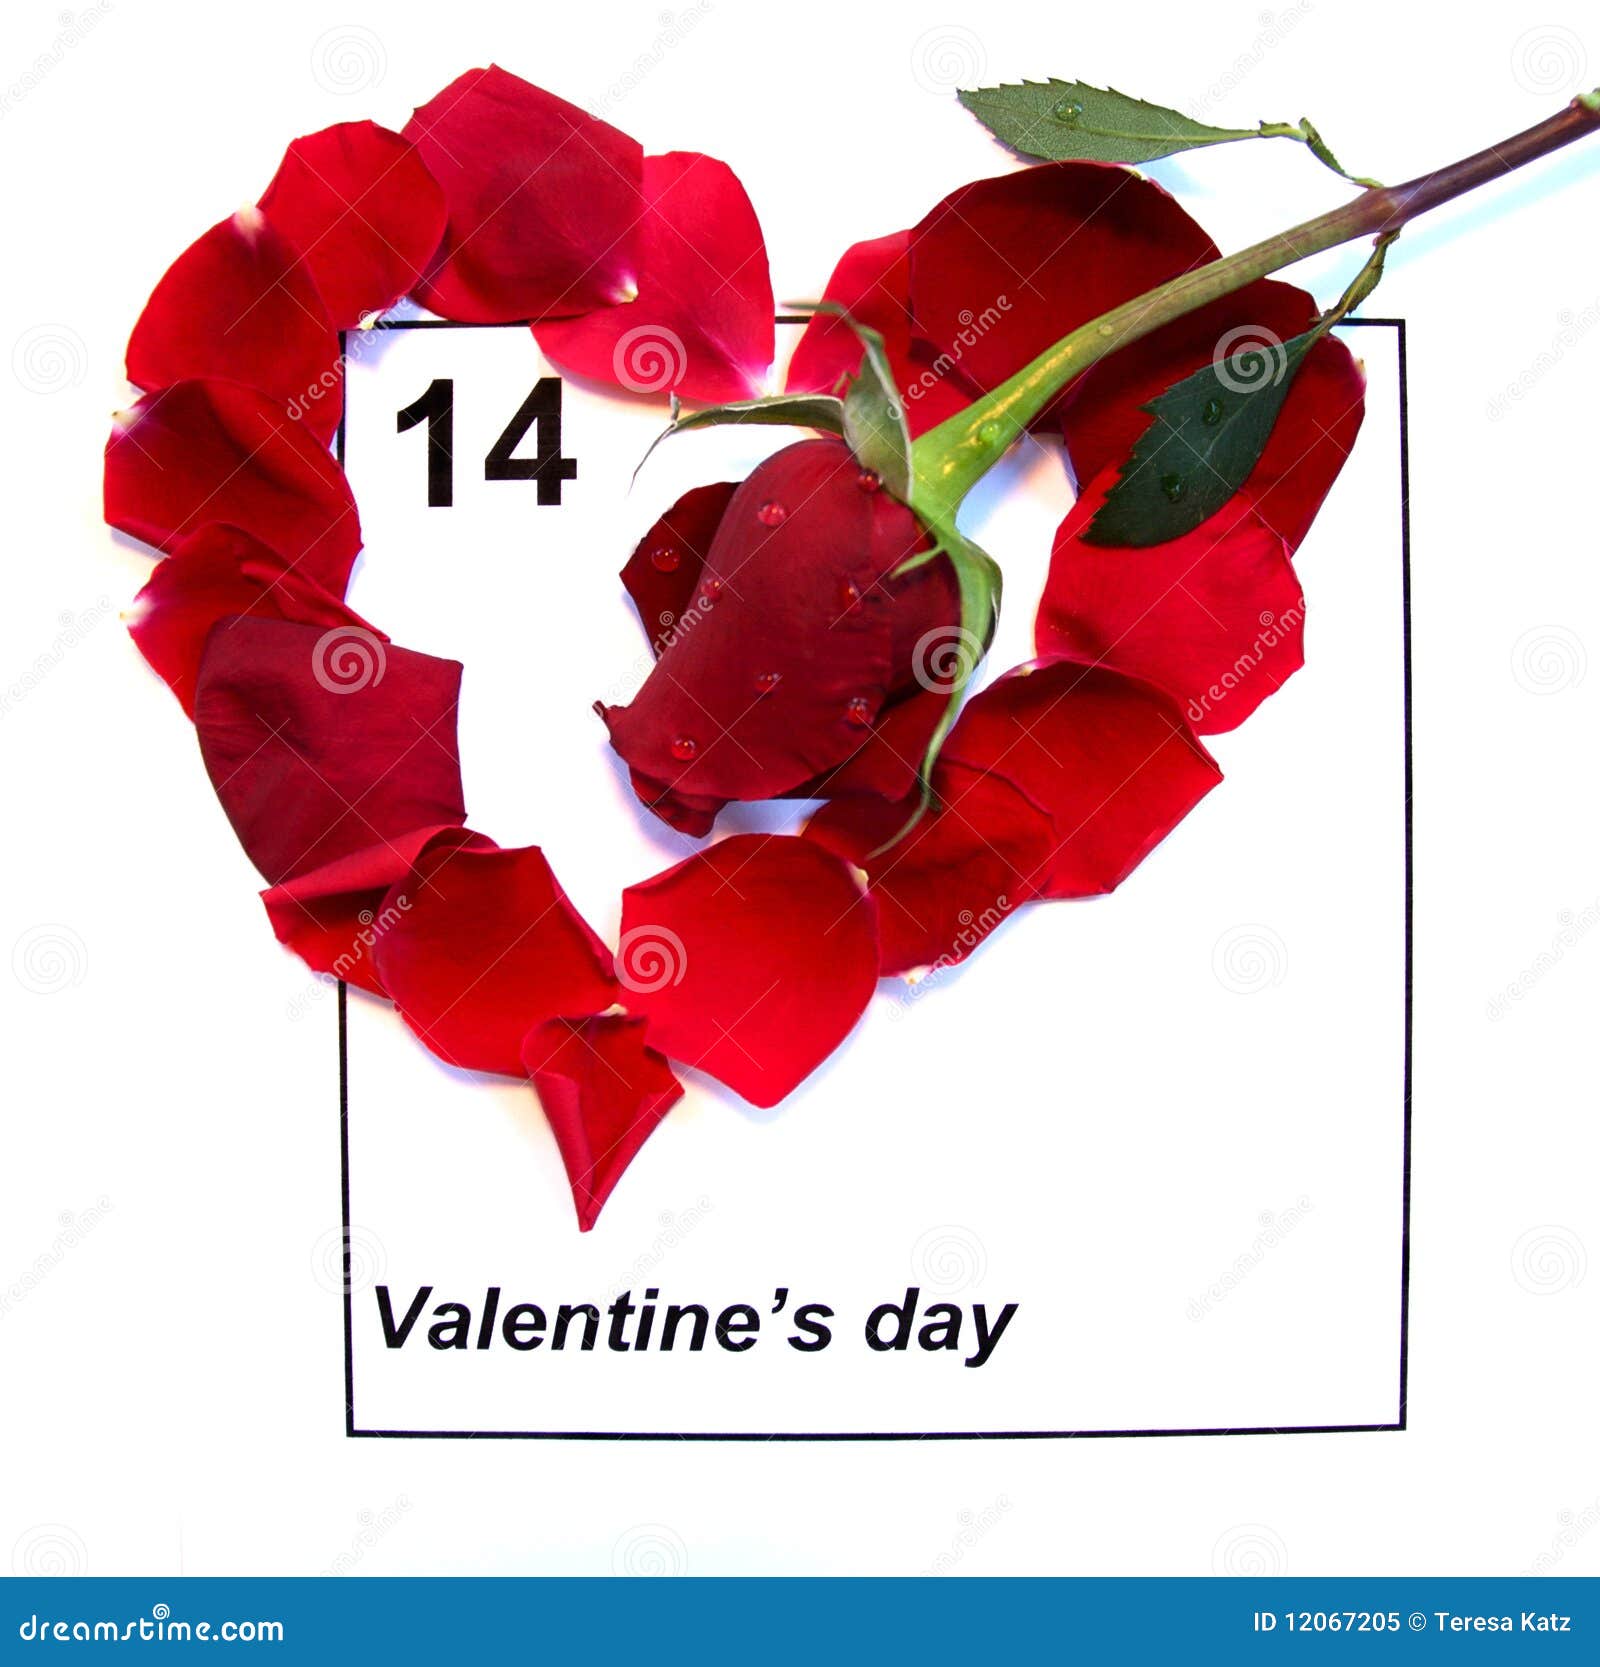 Valentines Day Calendar With Red Rose Stock Image - Image of flower, marria...